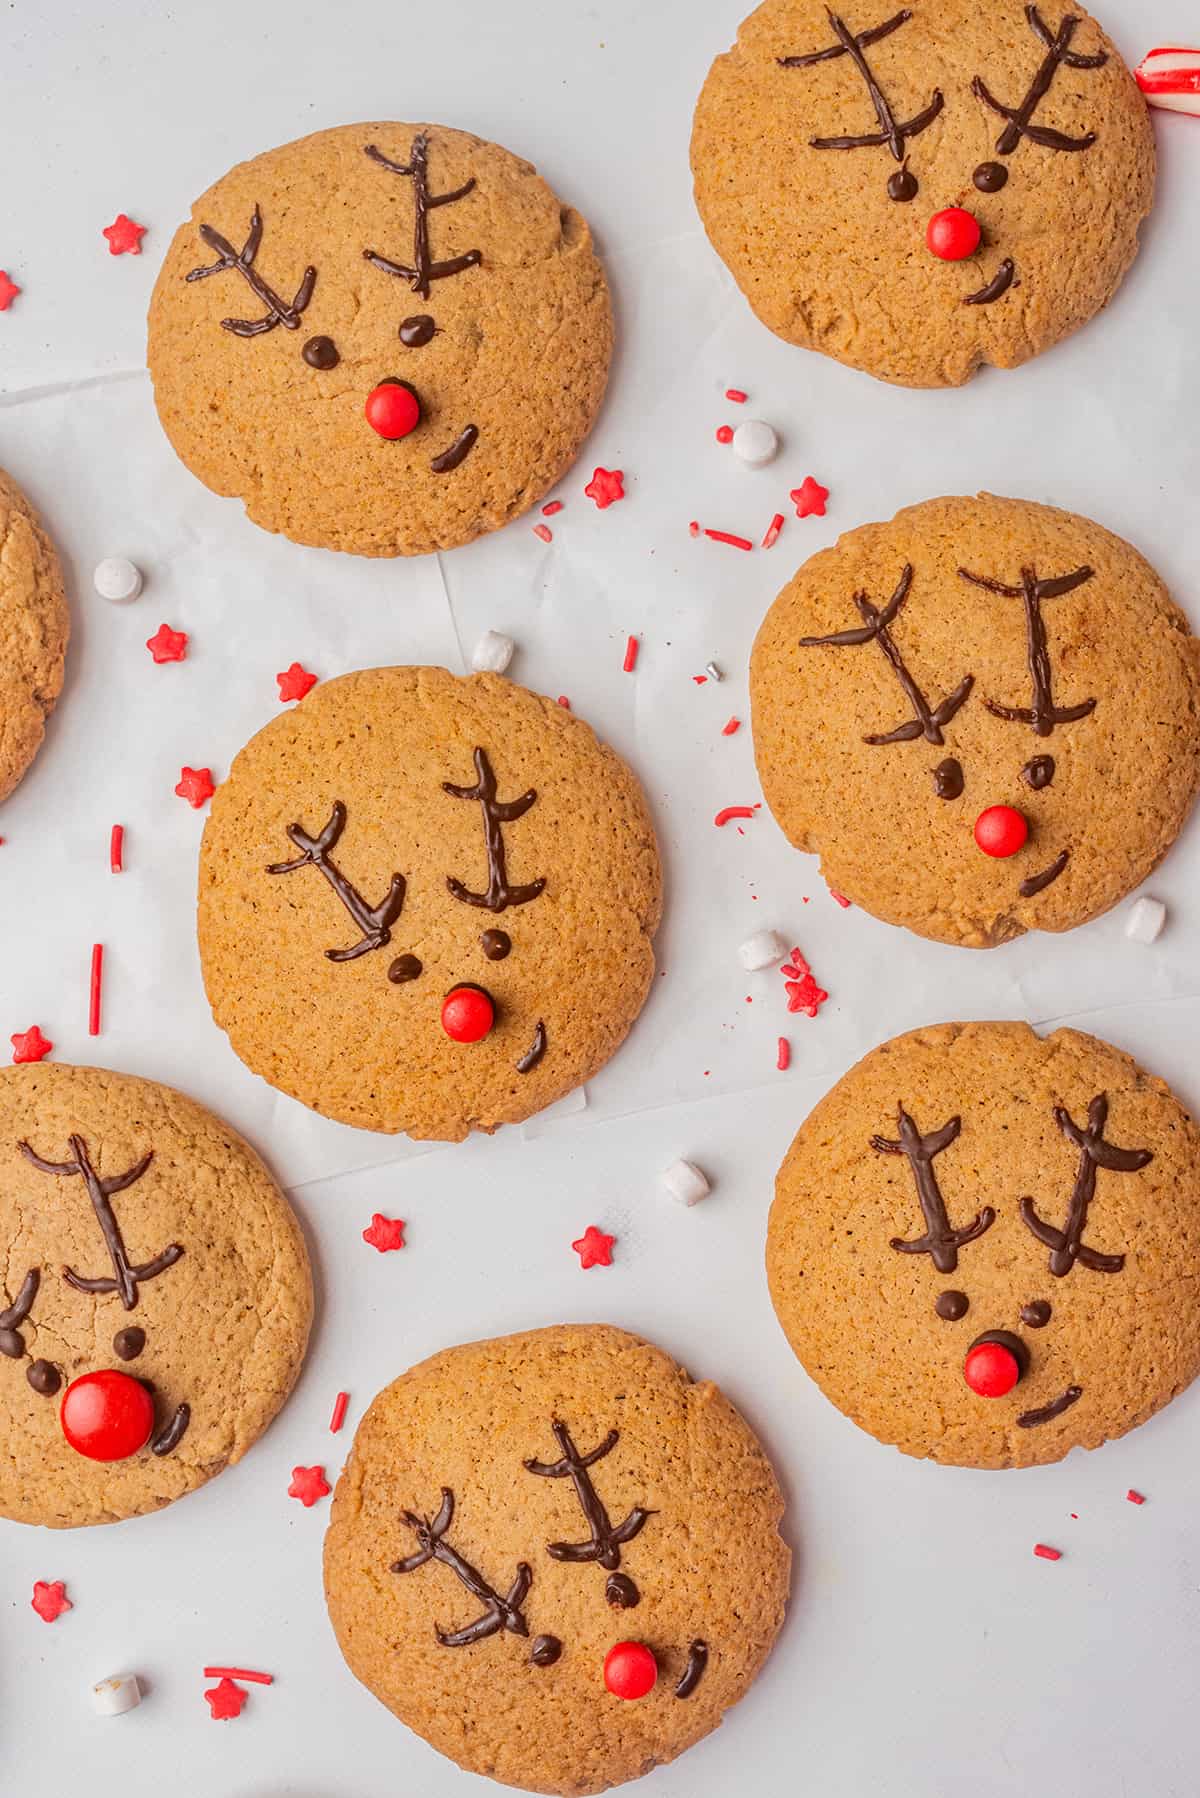 Decorated reindeer cookies sitting on a white surface.